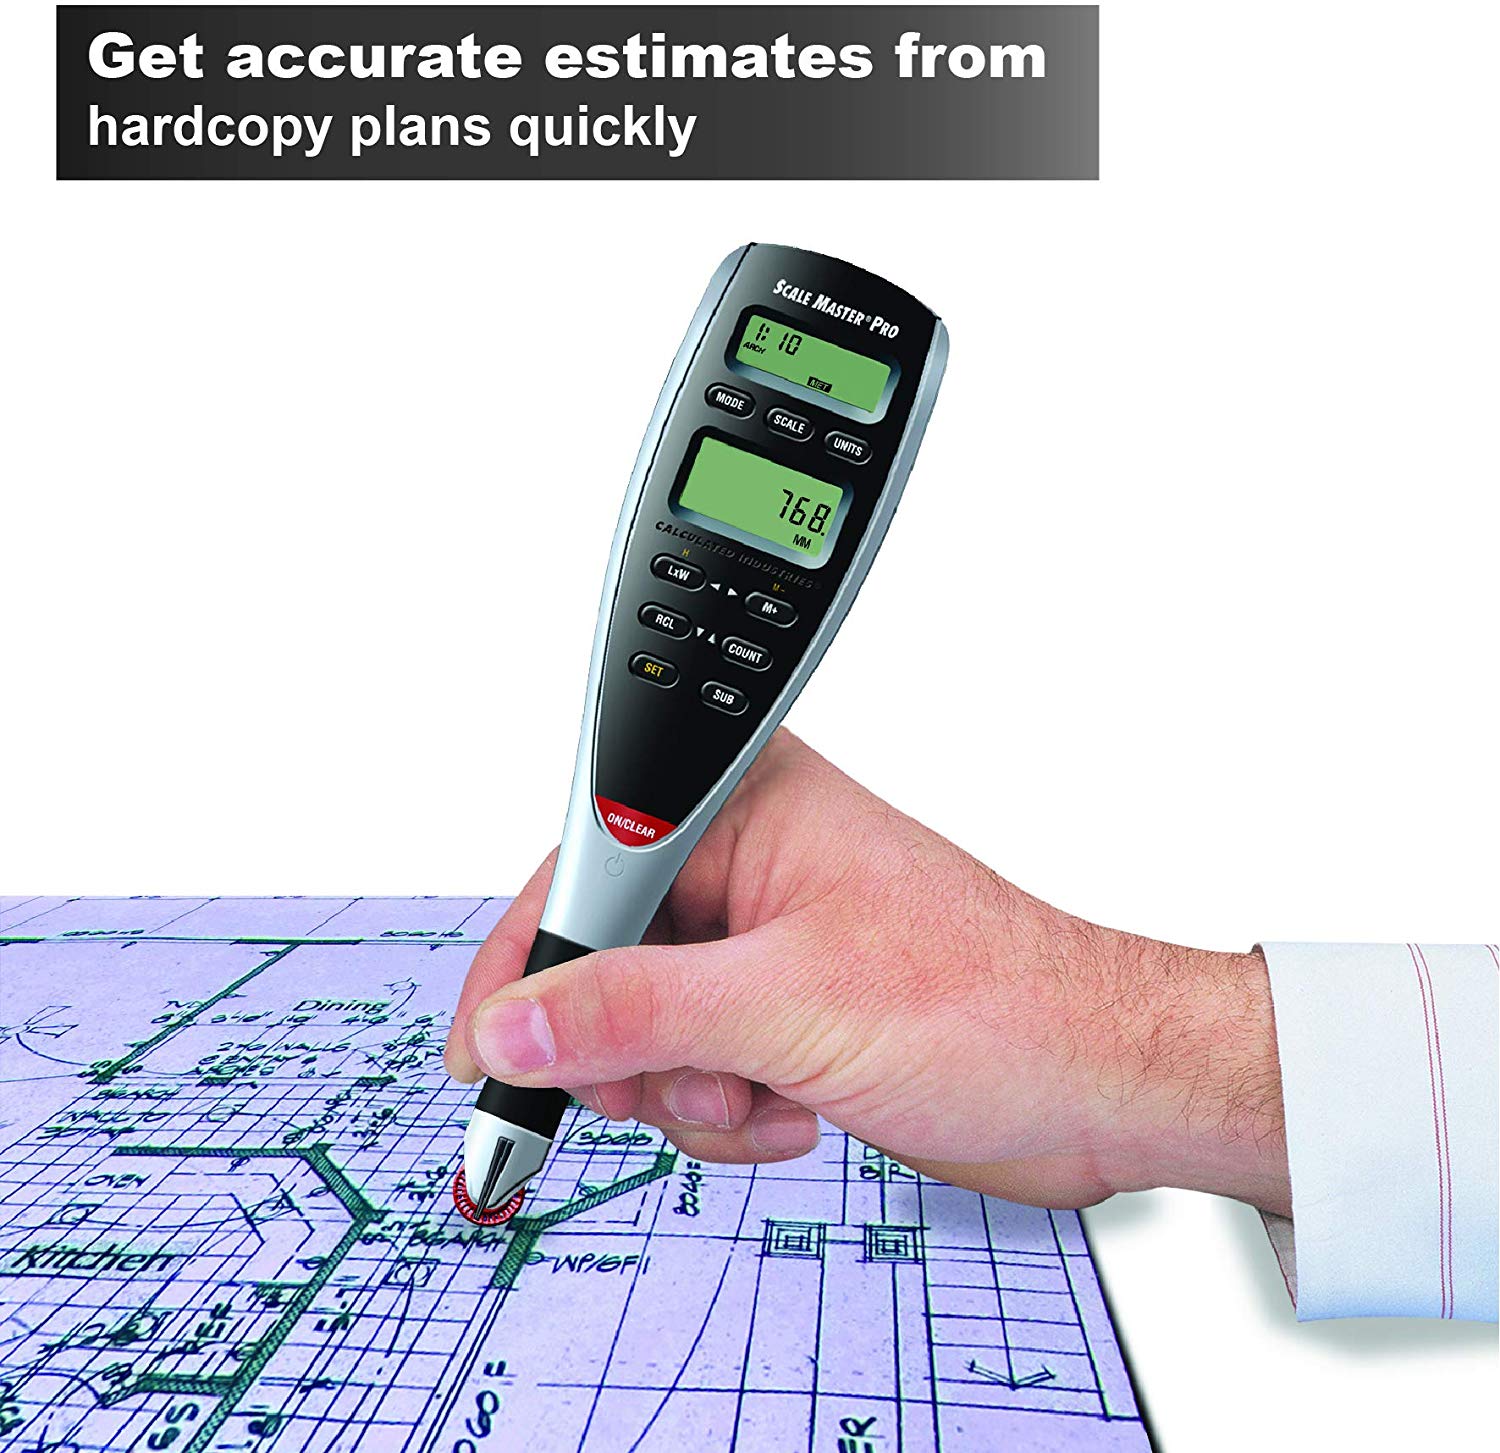 Calculated Industries 6025 Scale Master Pro Digital Plan Measure Take-off Tool | 72 Built-in US Imperial, Metric Scales | 6 Custom Scales for Out-of-Scale Plans | Dedicated Keys for Linear Measuring